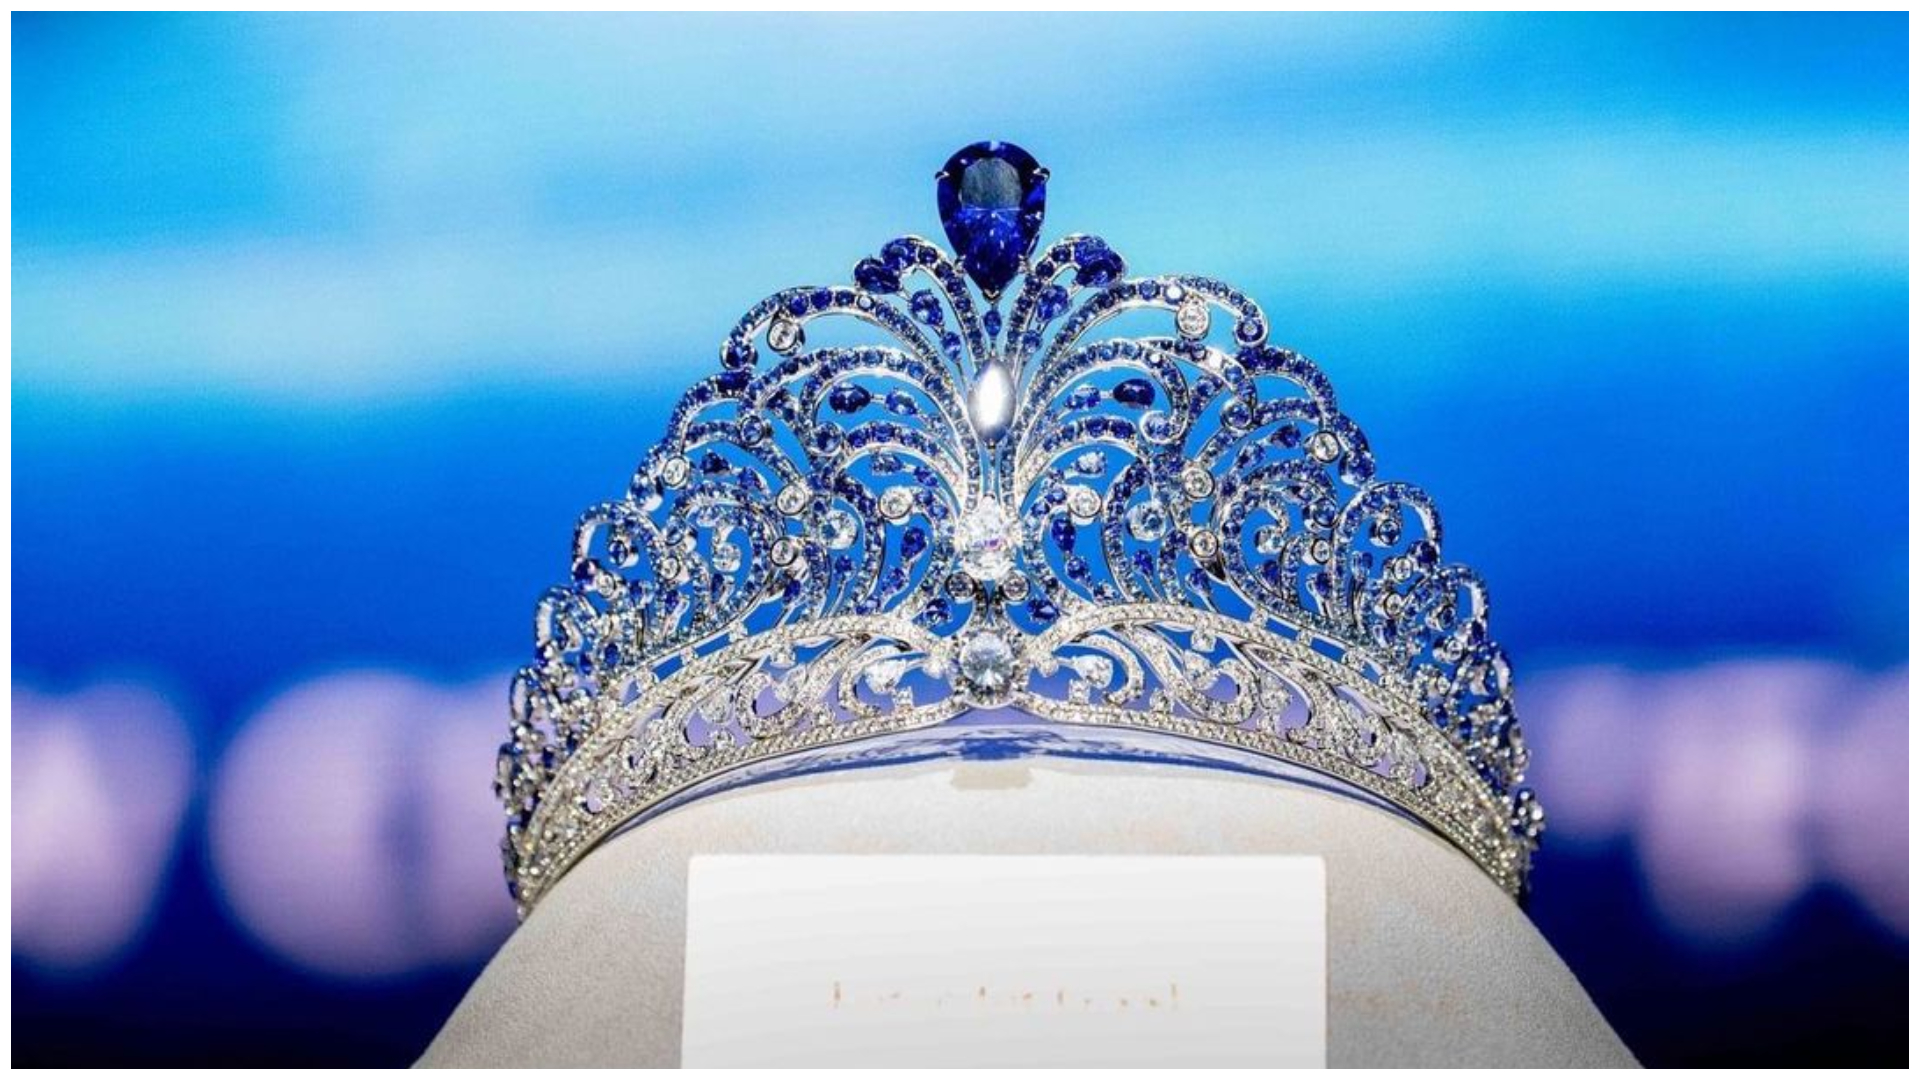 Force for Good The new Miss Universe Crown unveiled